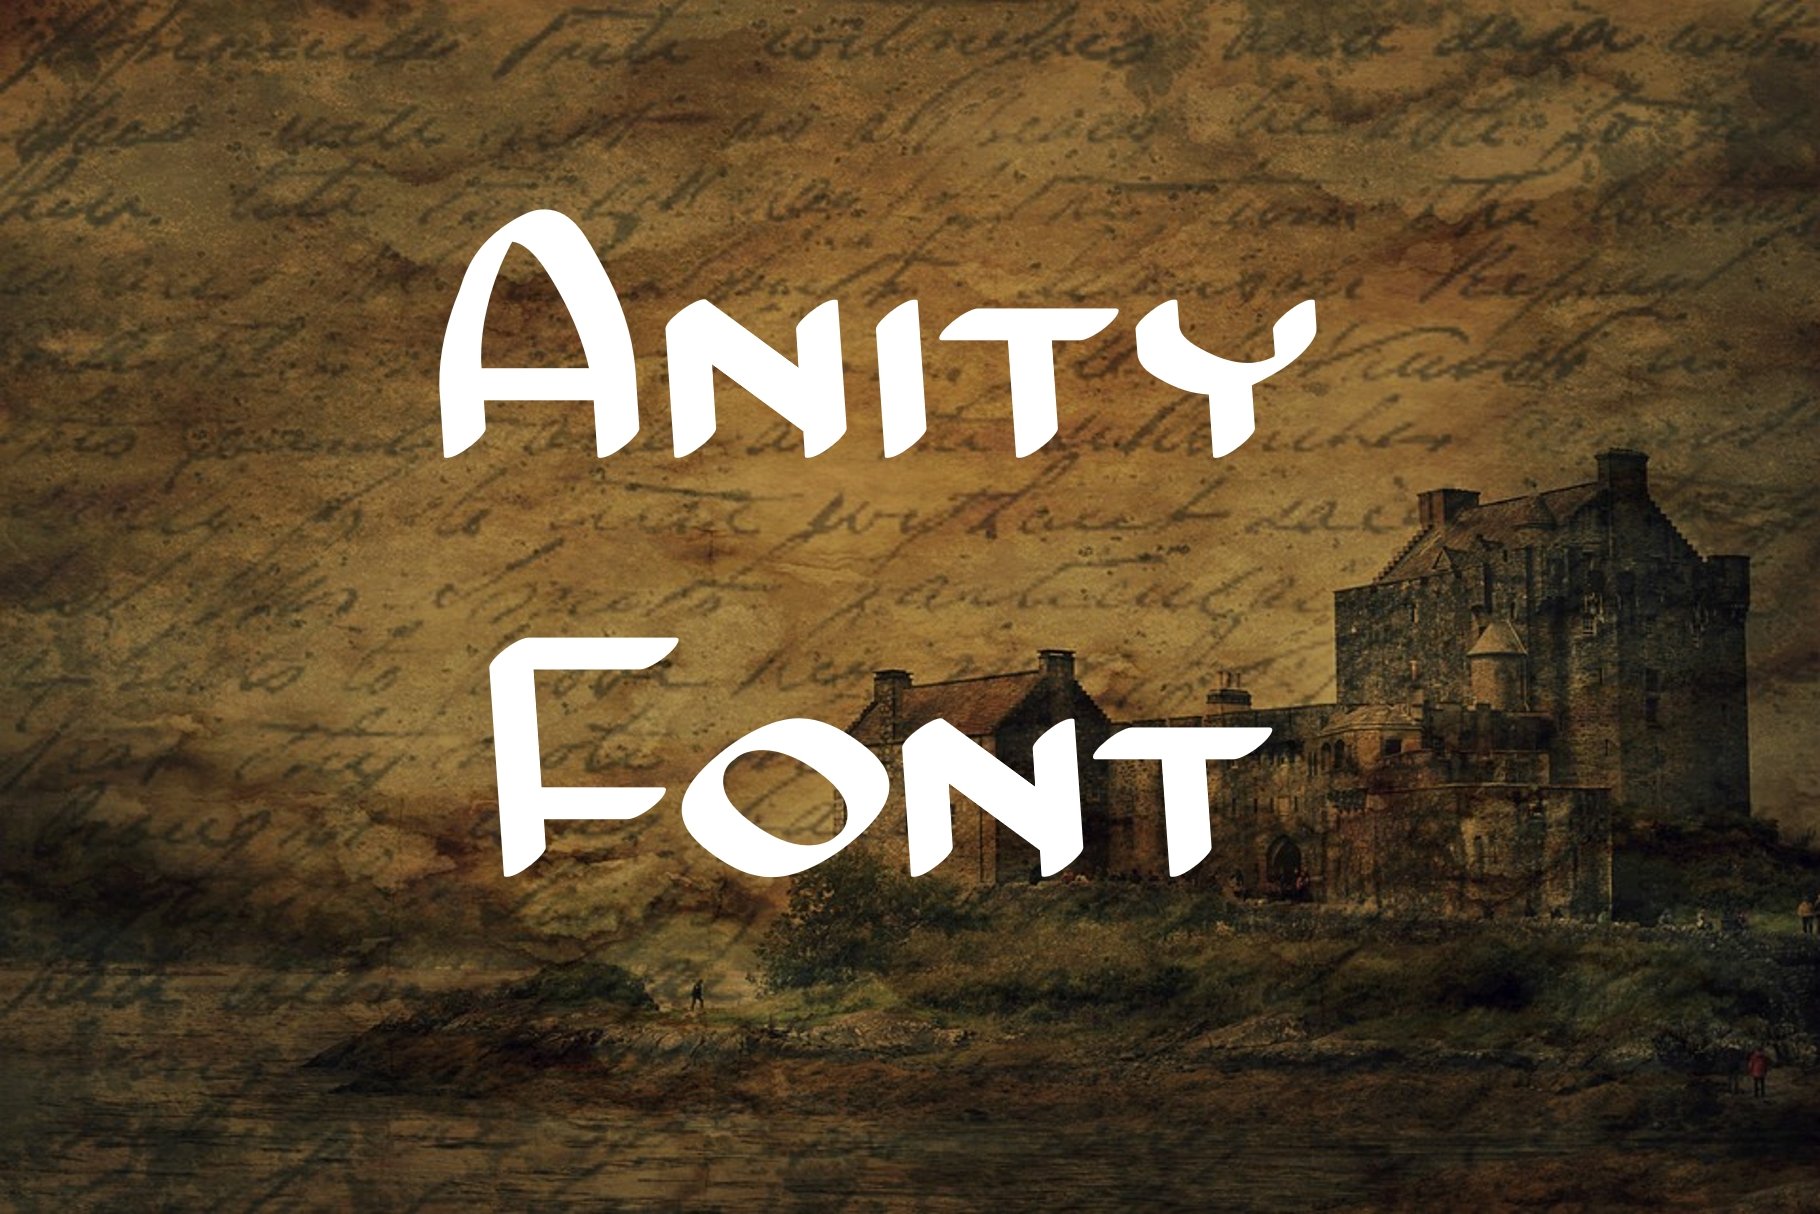 Anity Font cover image.